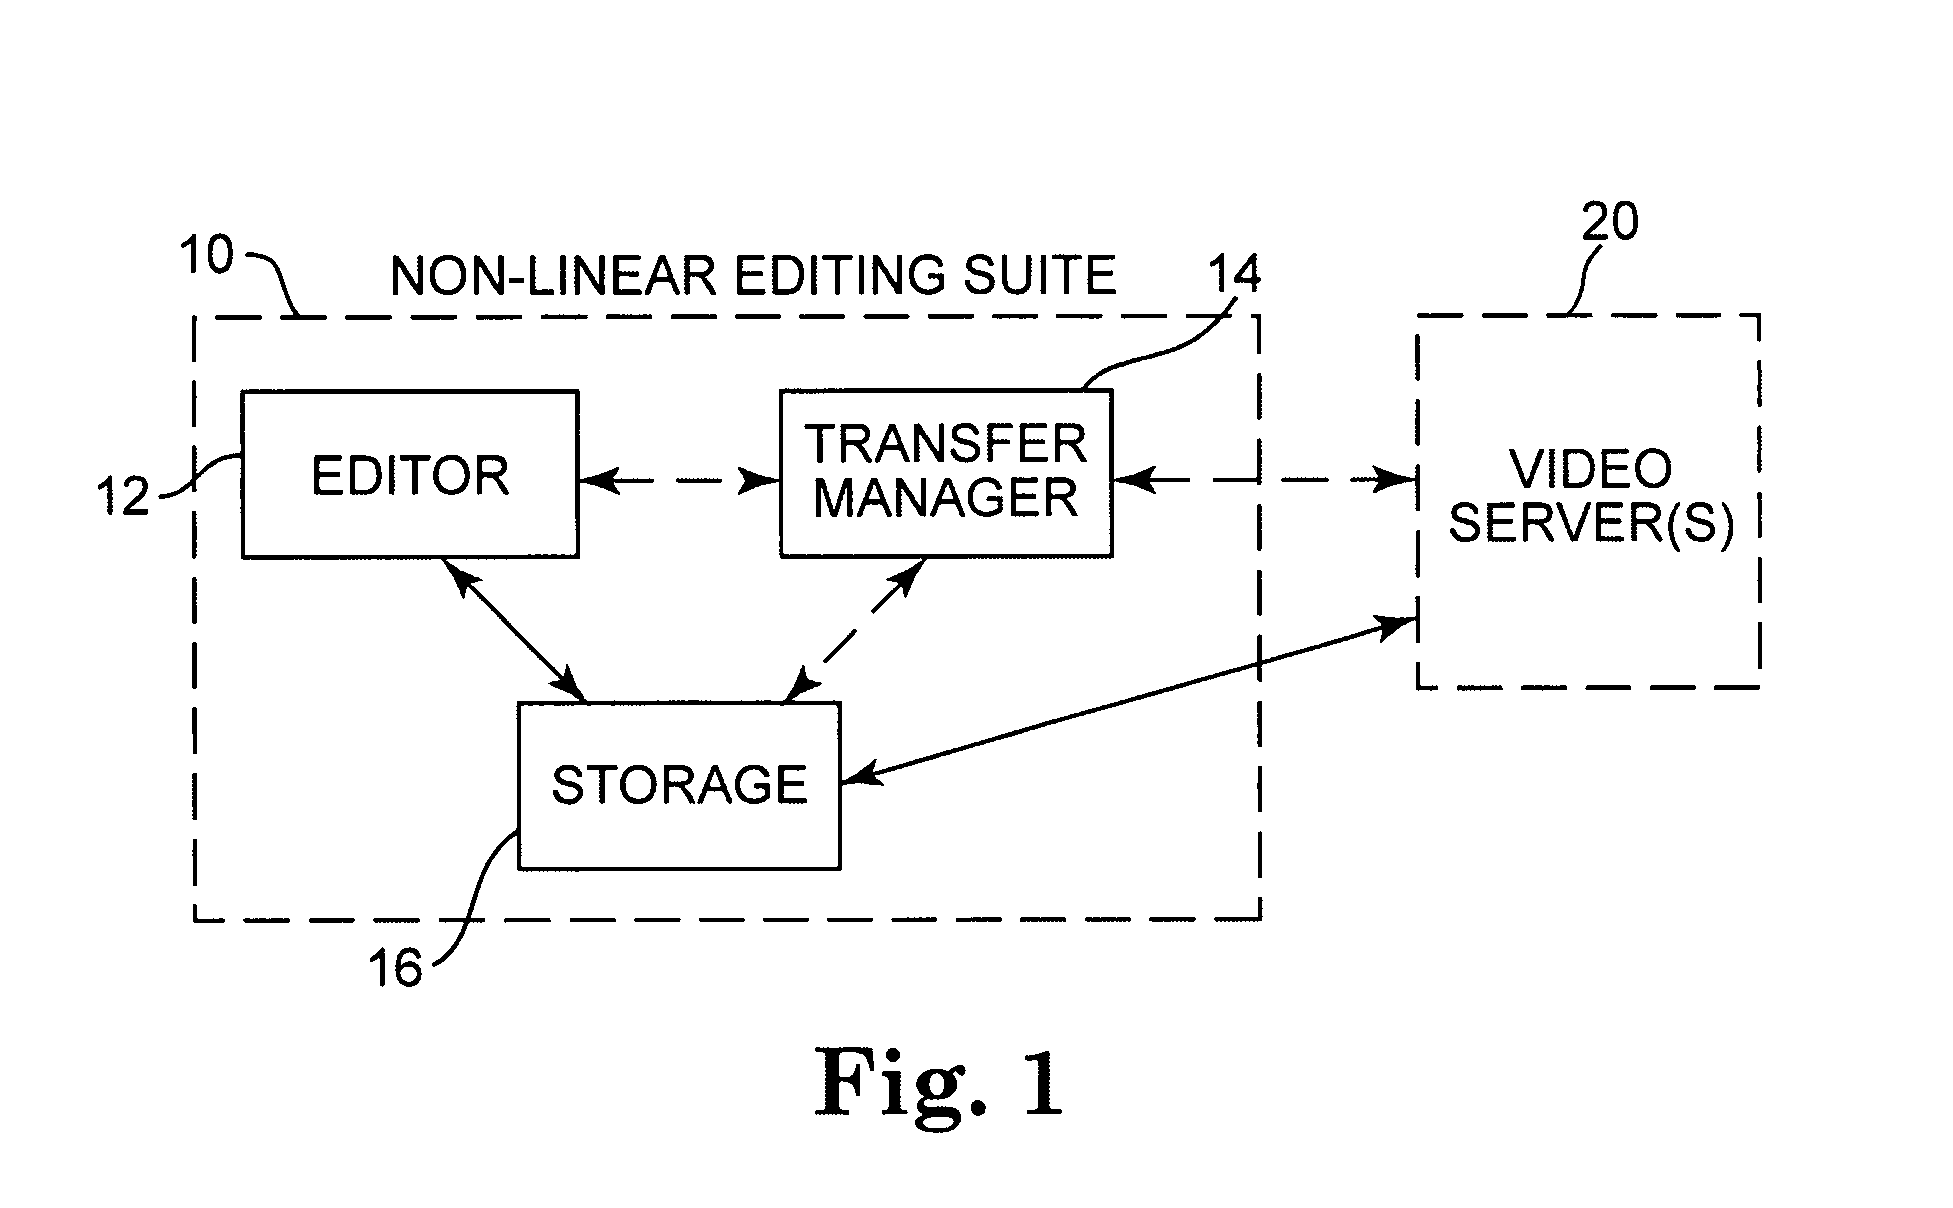 Interface for seamless integration of a non-linear editing system and a data archive system